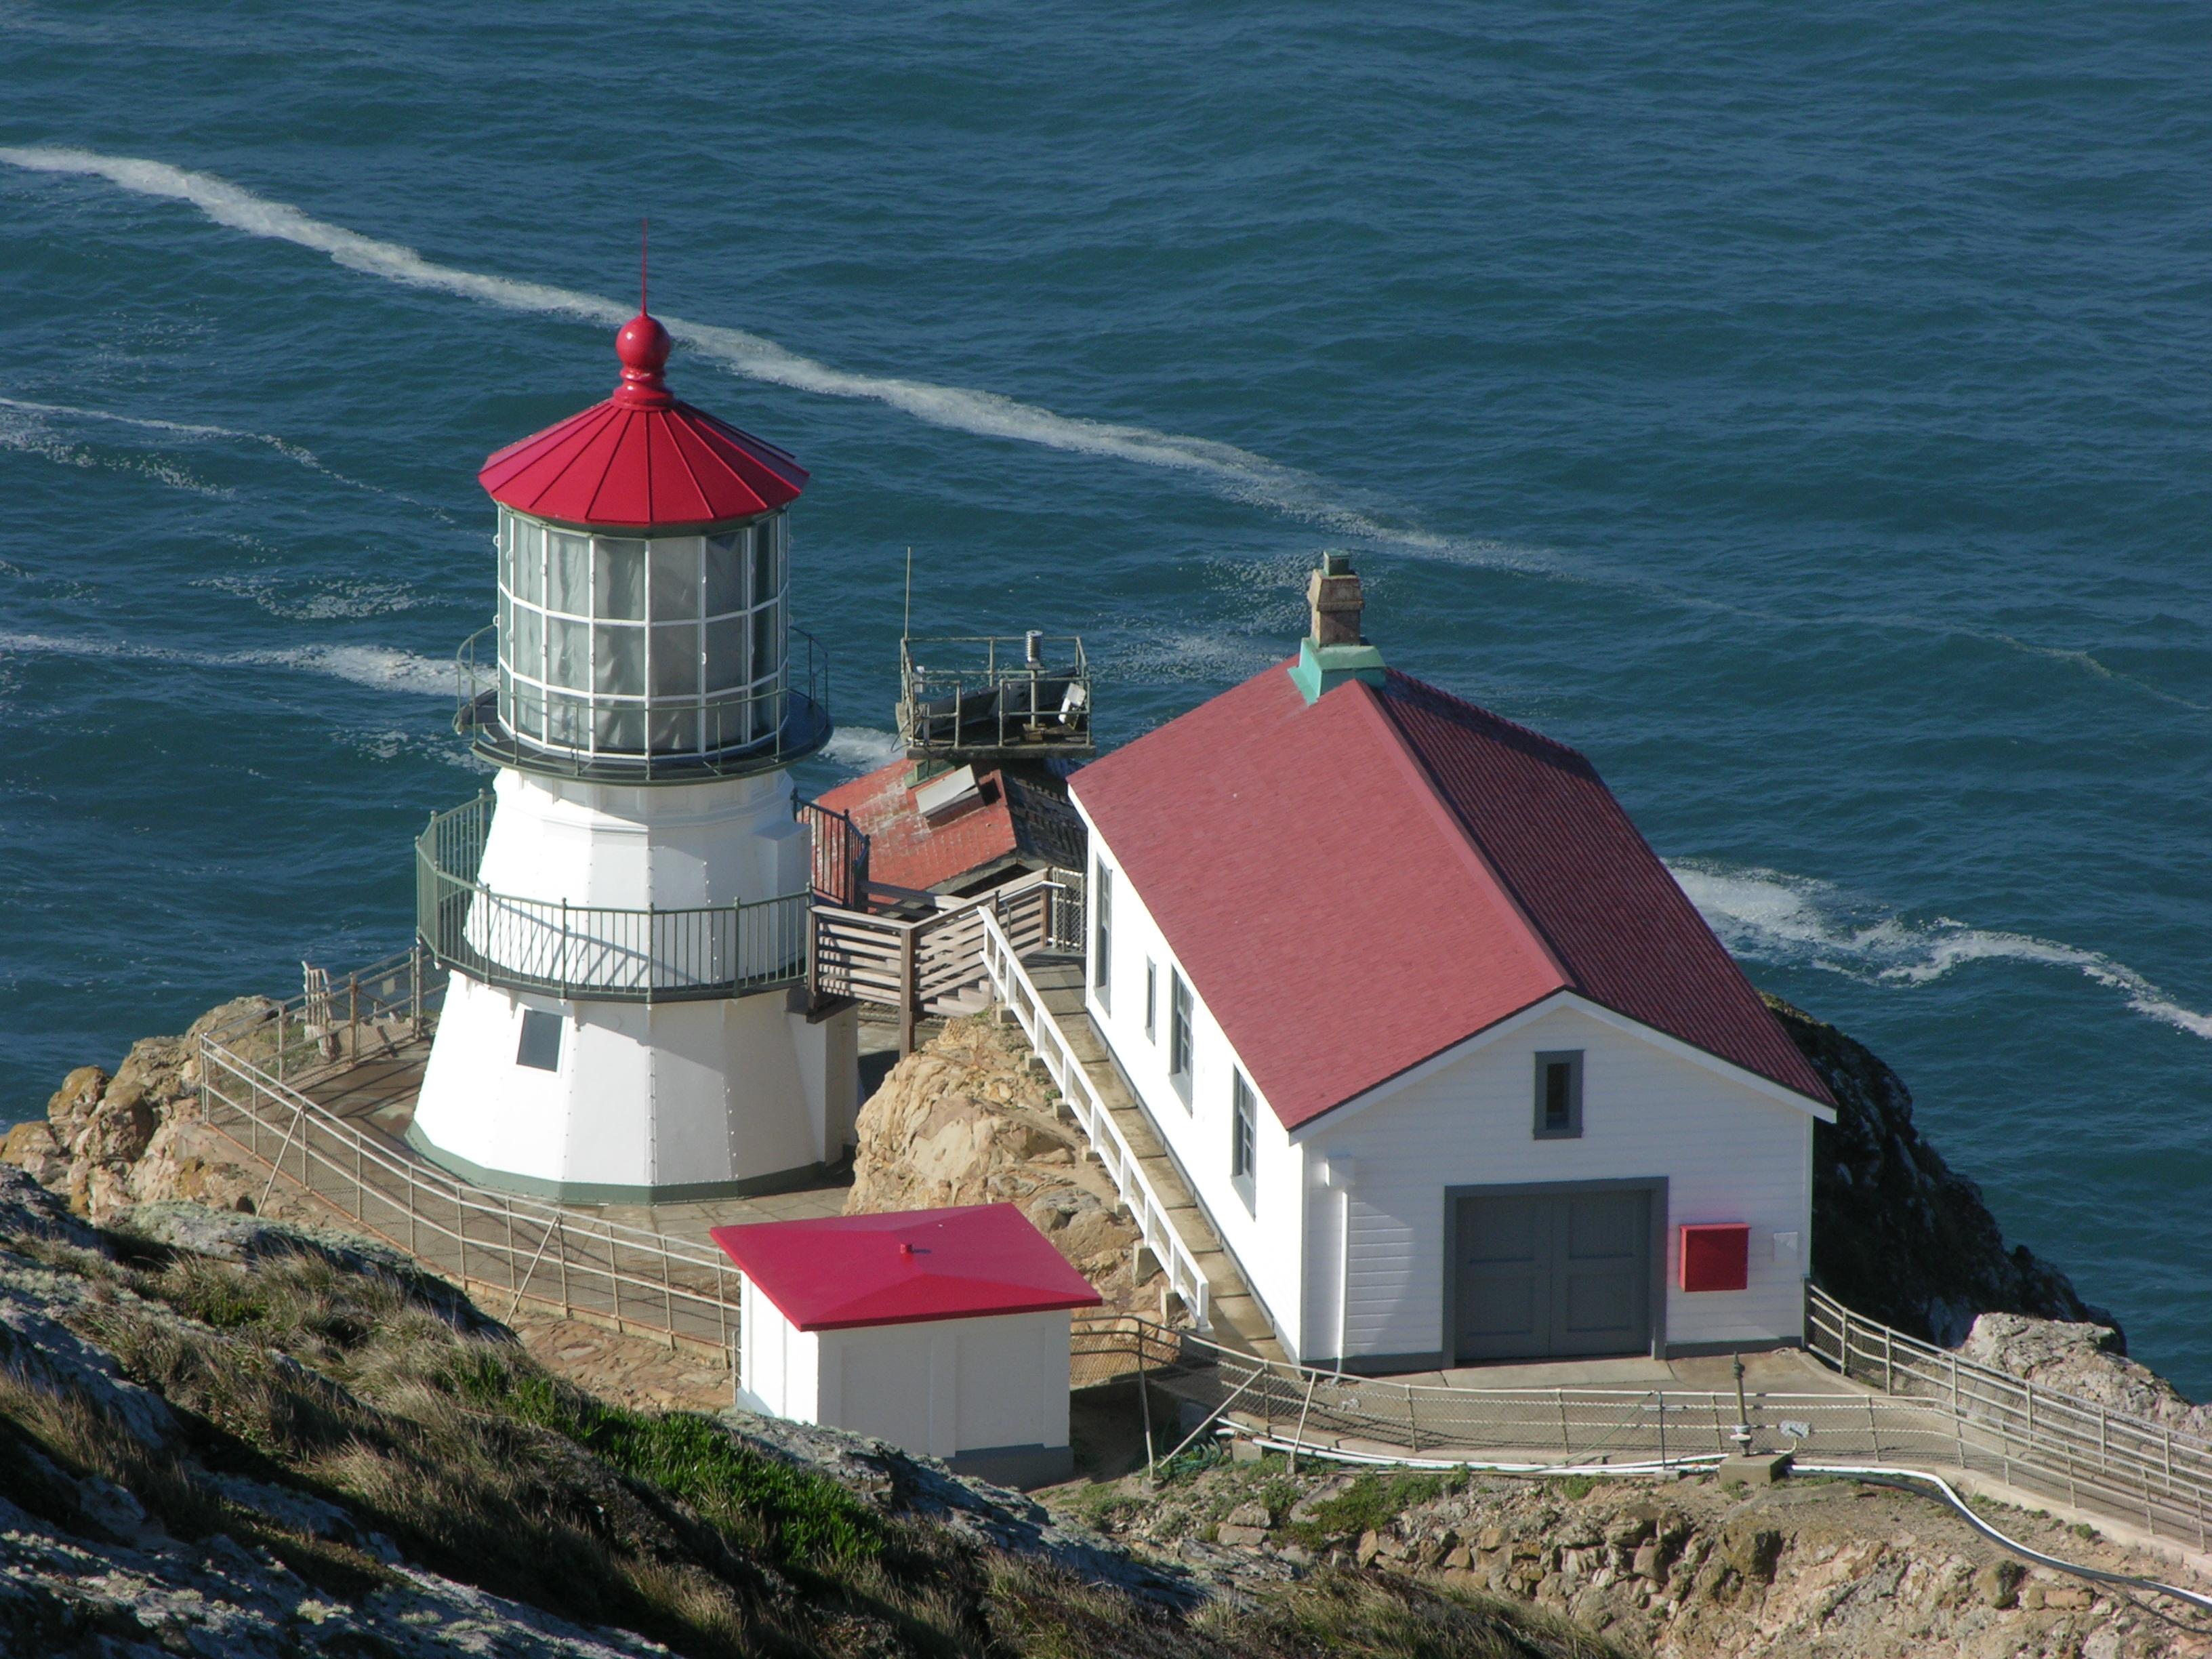 A three-story-tall, white-sided, red-roofed lighthouse adjacent to three other small buildings.